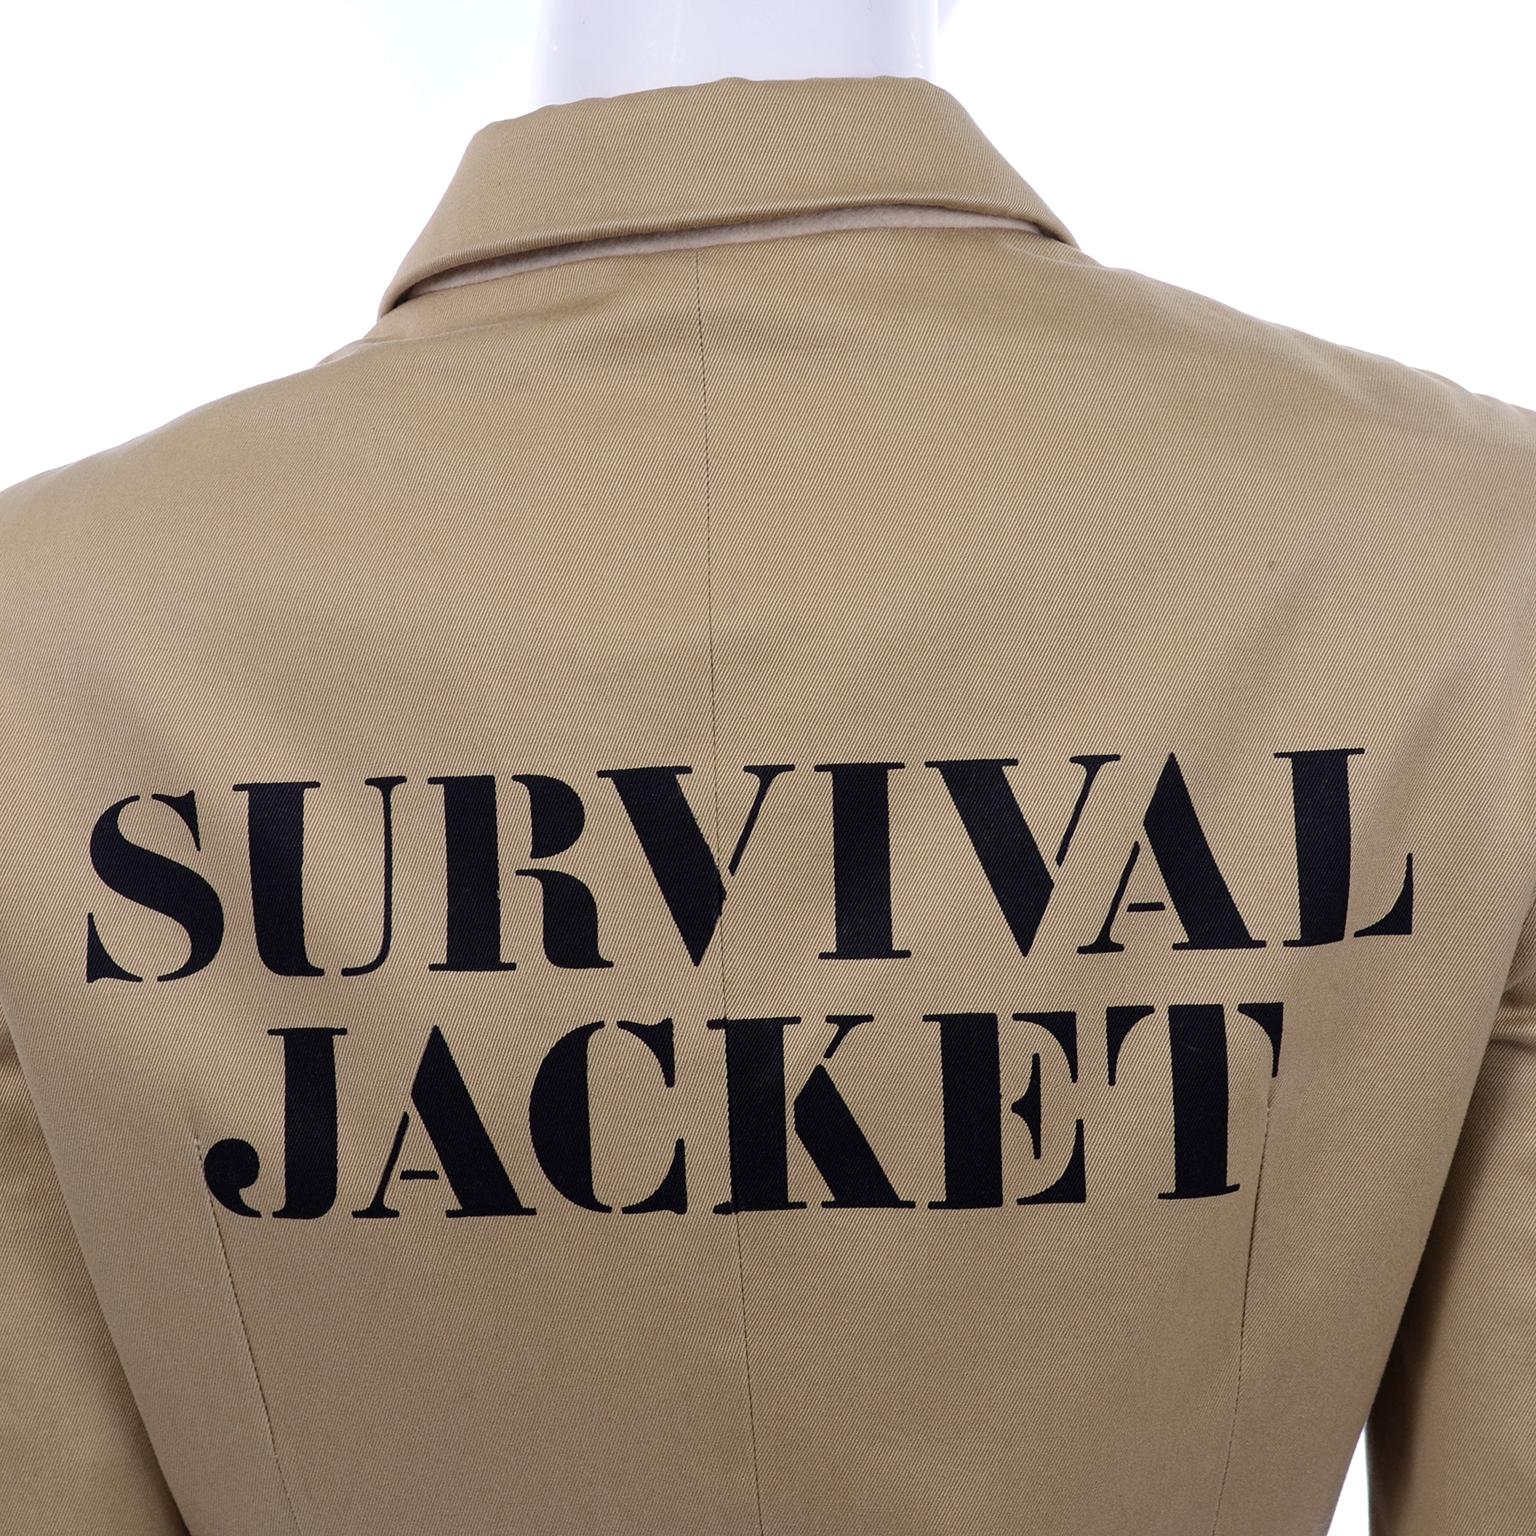 1991 Franco Moschino Couture Survival Jacke in Khaki Baumwolle Urban Jungle Tools 11